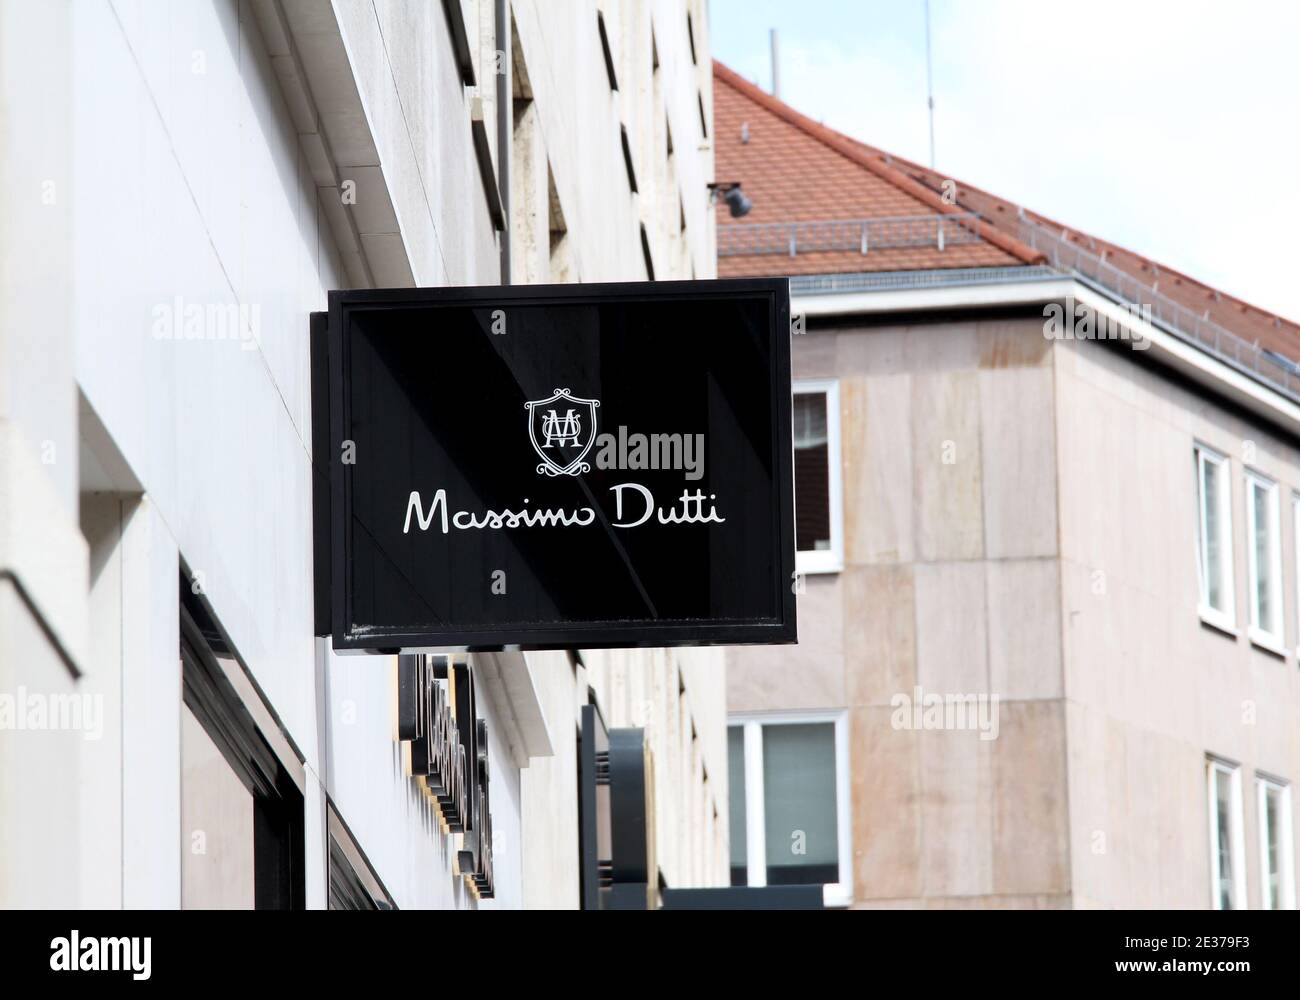 Massimo Dutti store. Massimo Dutti is a Italian clothes manufacturing  company, part of the Inditex group Stock Photo - Alamy